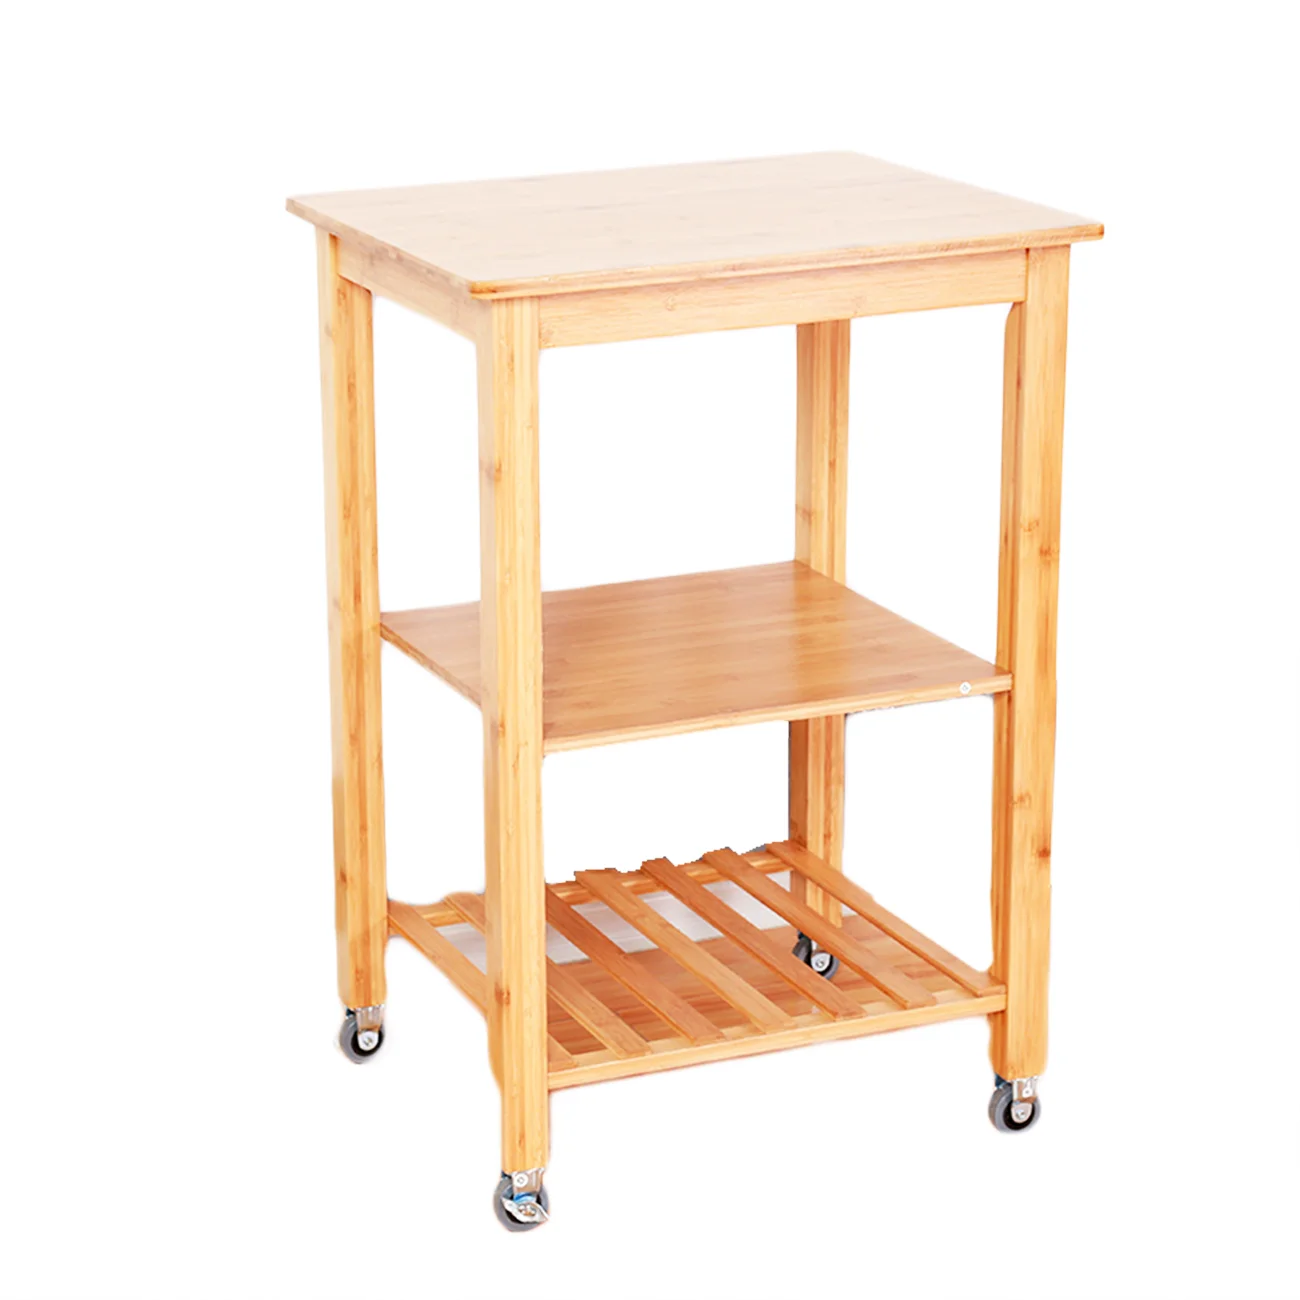 Wholesale High Quality Kitchen Bathroom 3 Tier Rolling Cart Bamboo Storage Cart with Storage Shelf